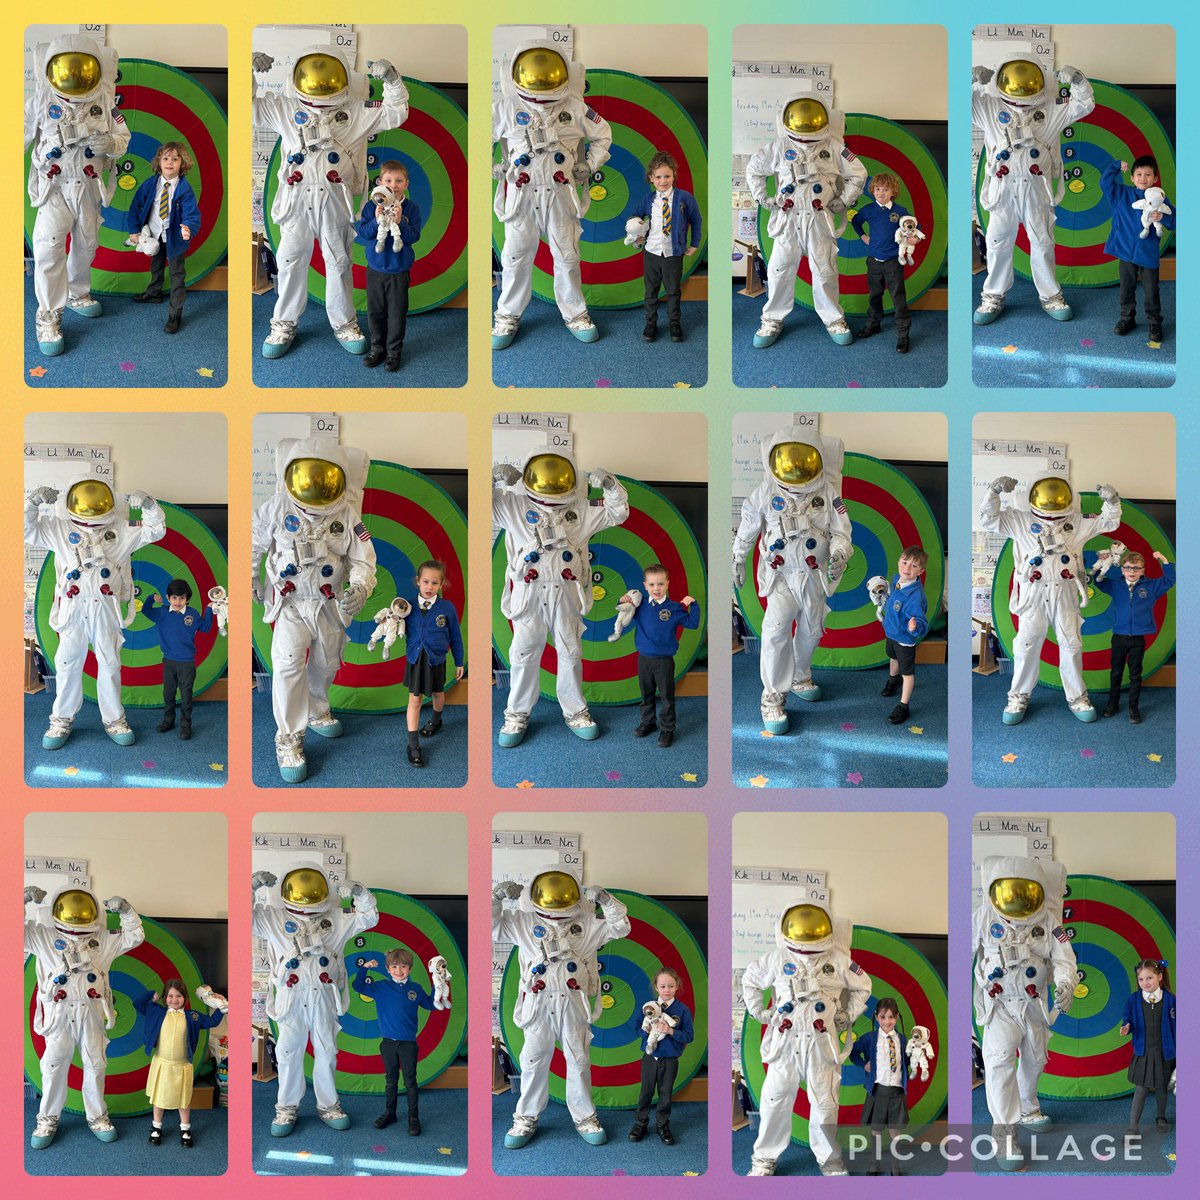 We have LOVED having the spaceman in Year 1 today! Thanks Mr B #spacefacts #neilarmstrong #rocket #history @Wow_workshops